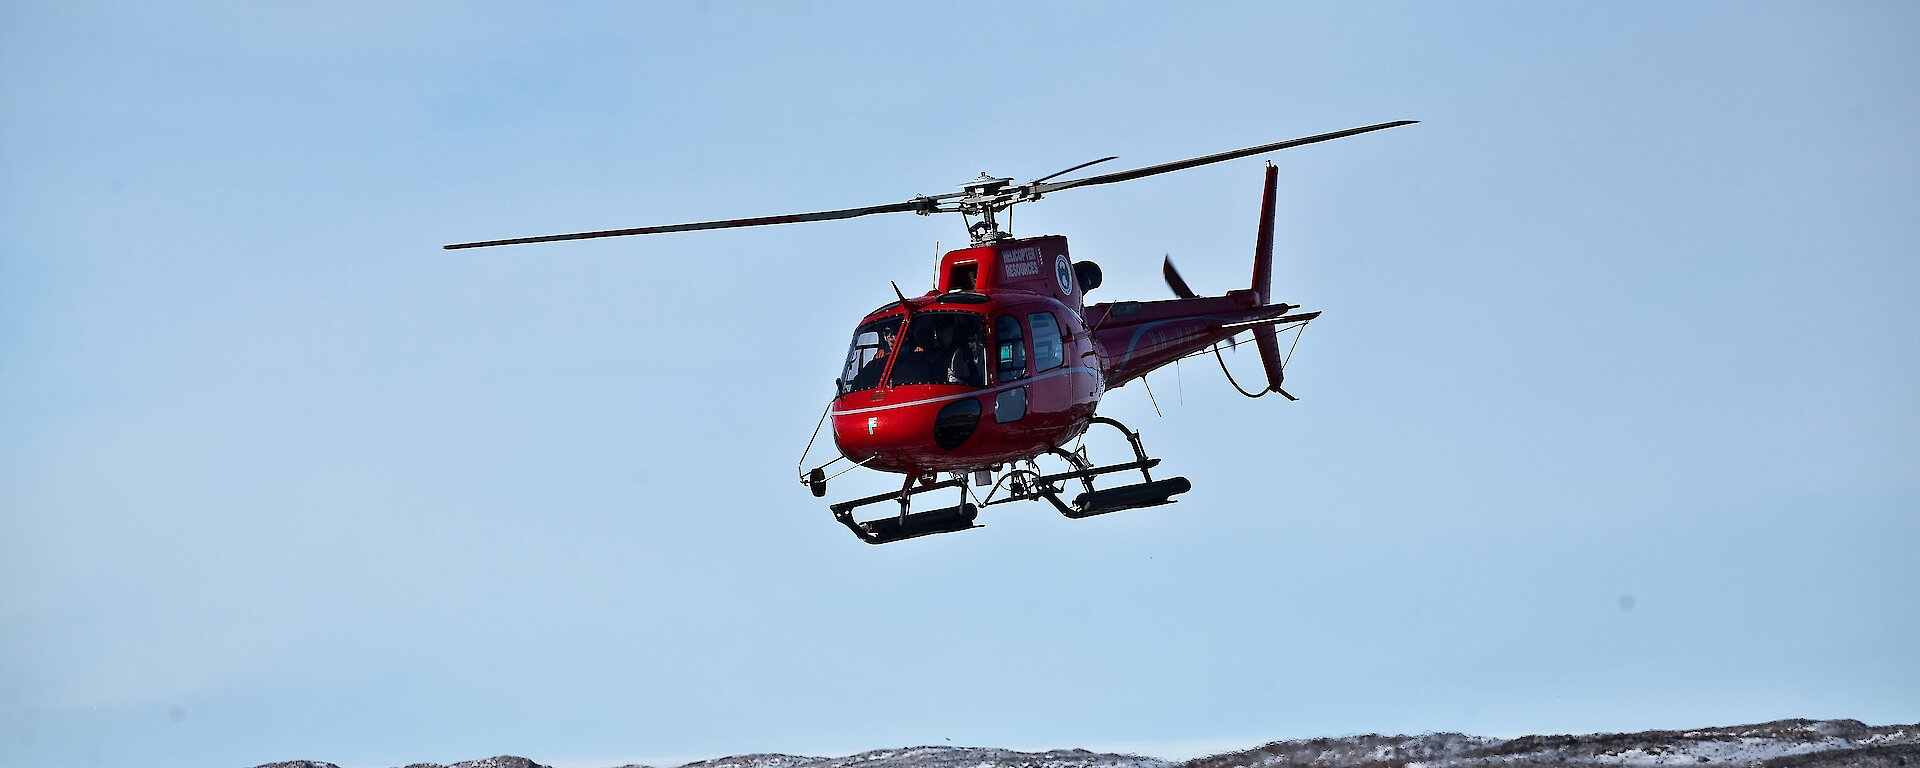 AS350B3 helicopter hovers over the snow dusted ground.